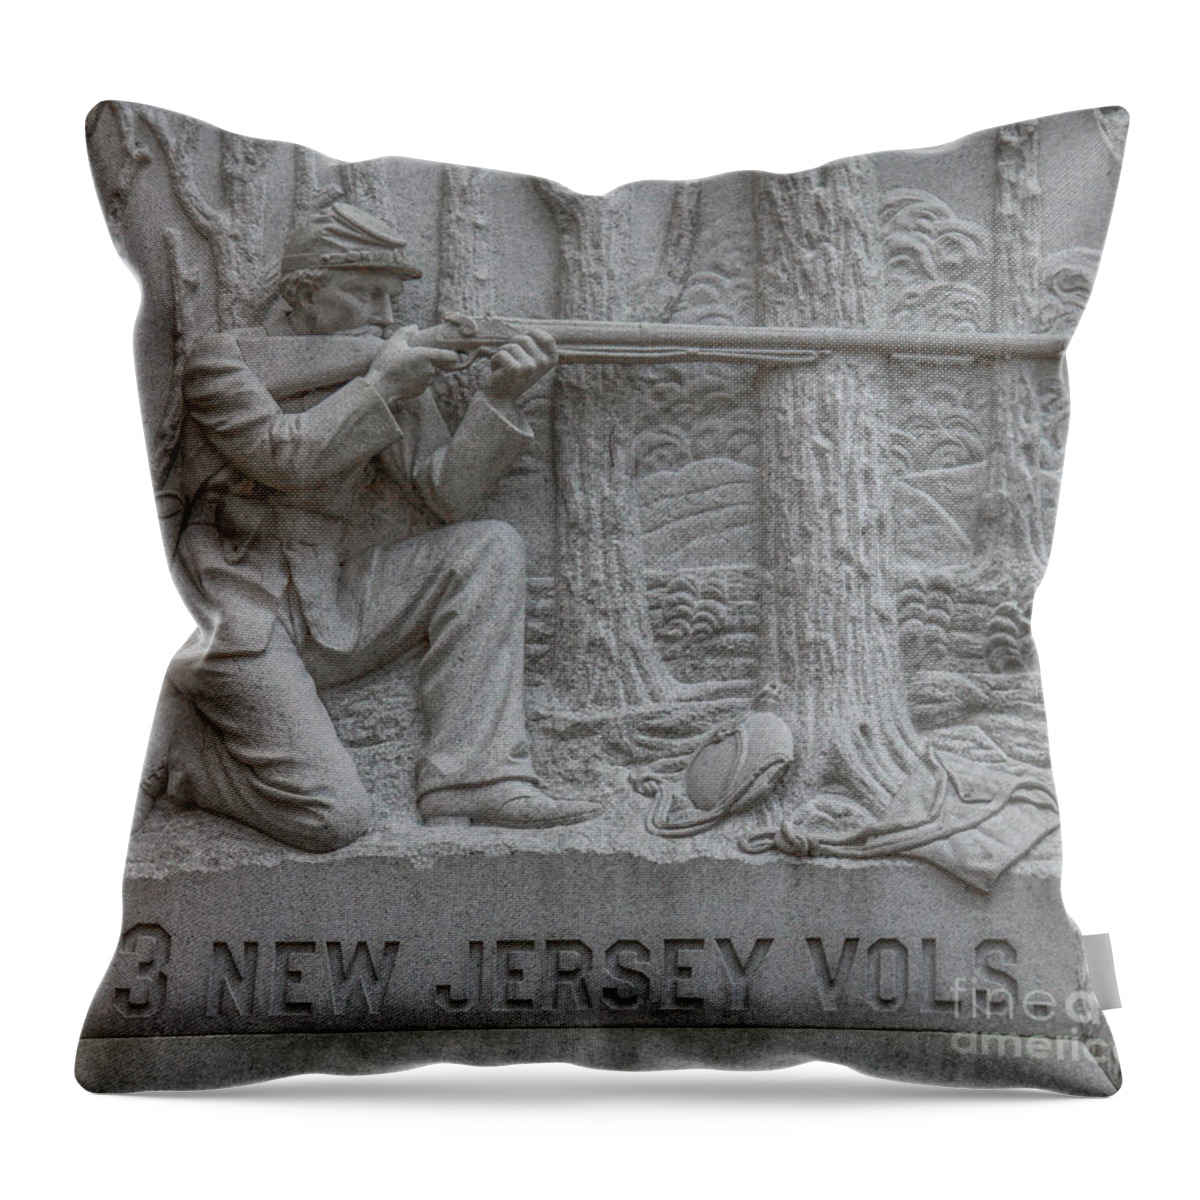 13th New Jersey Volunteer Infantry Throw Pillow featuring the photograph 13th New Jersey Volunteer Infantry by Randy Steele